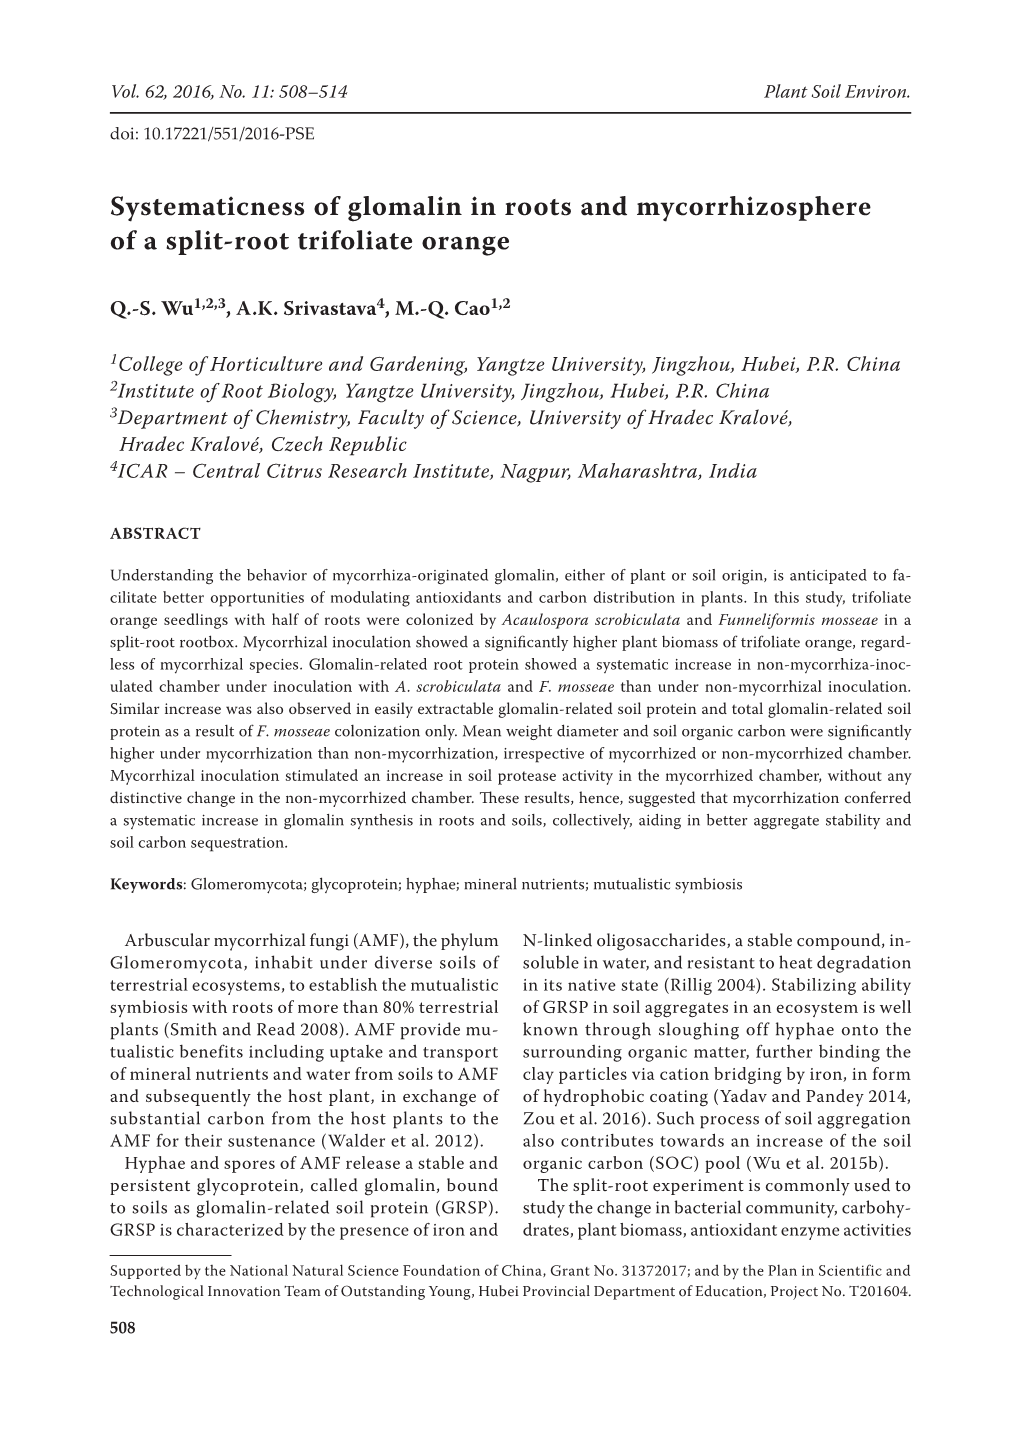 Systematicness of Glomalin in Roots and Mycorrhizosphere of a Split-Root Trifoliate Orange